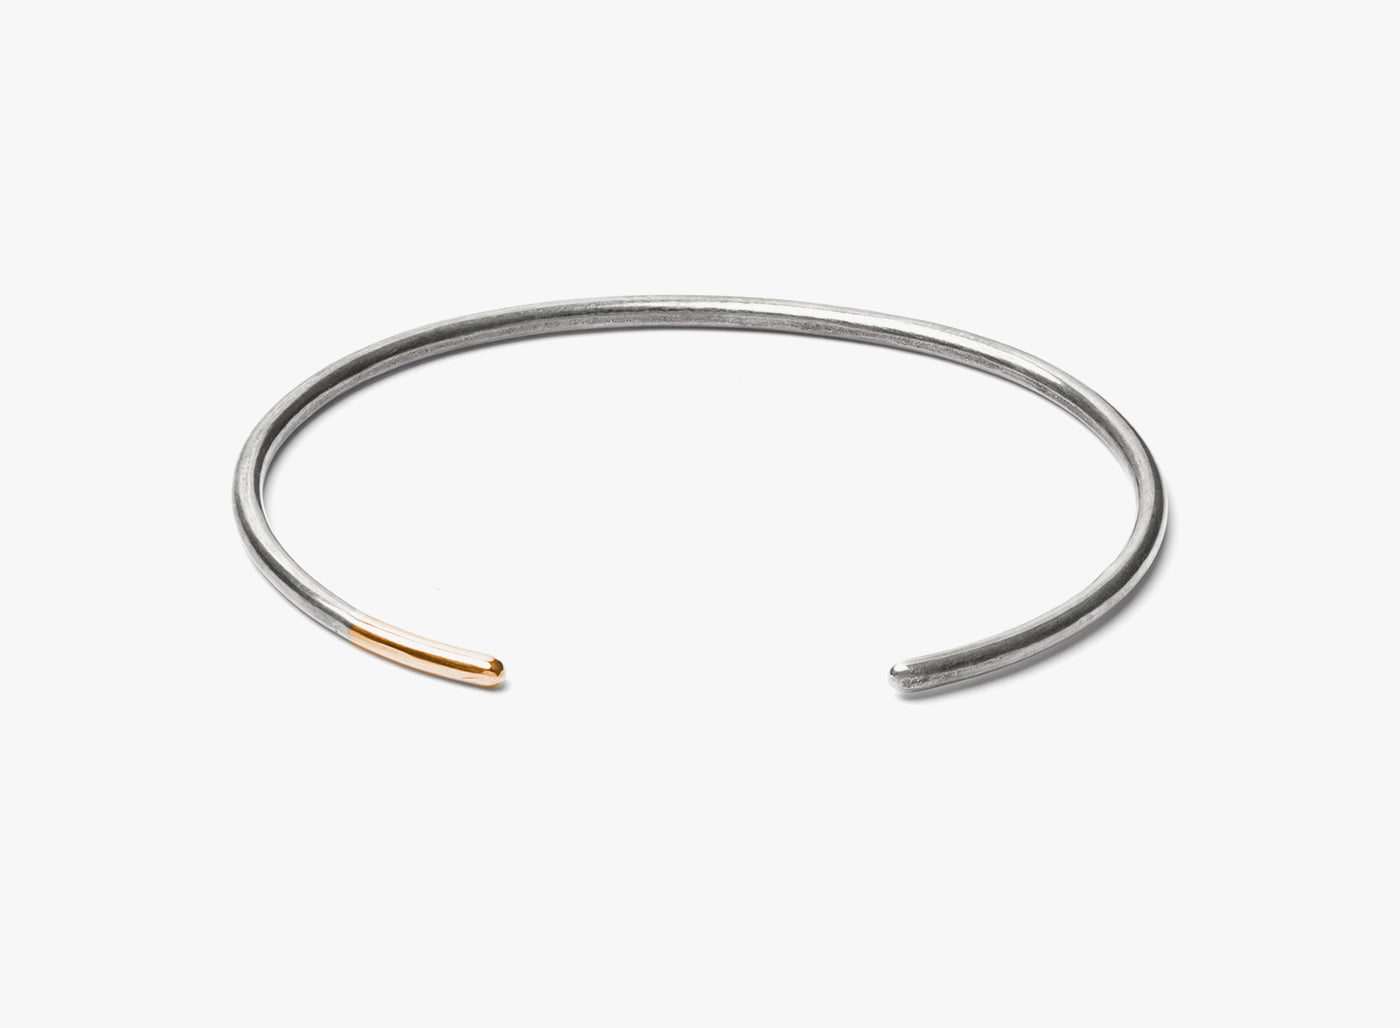 MIXED METAL STERLING SILVER / 18K ROSE GOLD CUFF BRACELET 118: this 10 gauge silver cuff is finished with an 18k rose gold tip